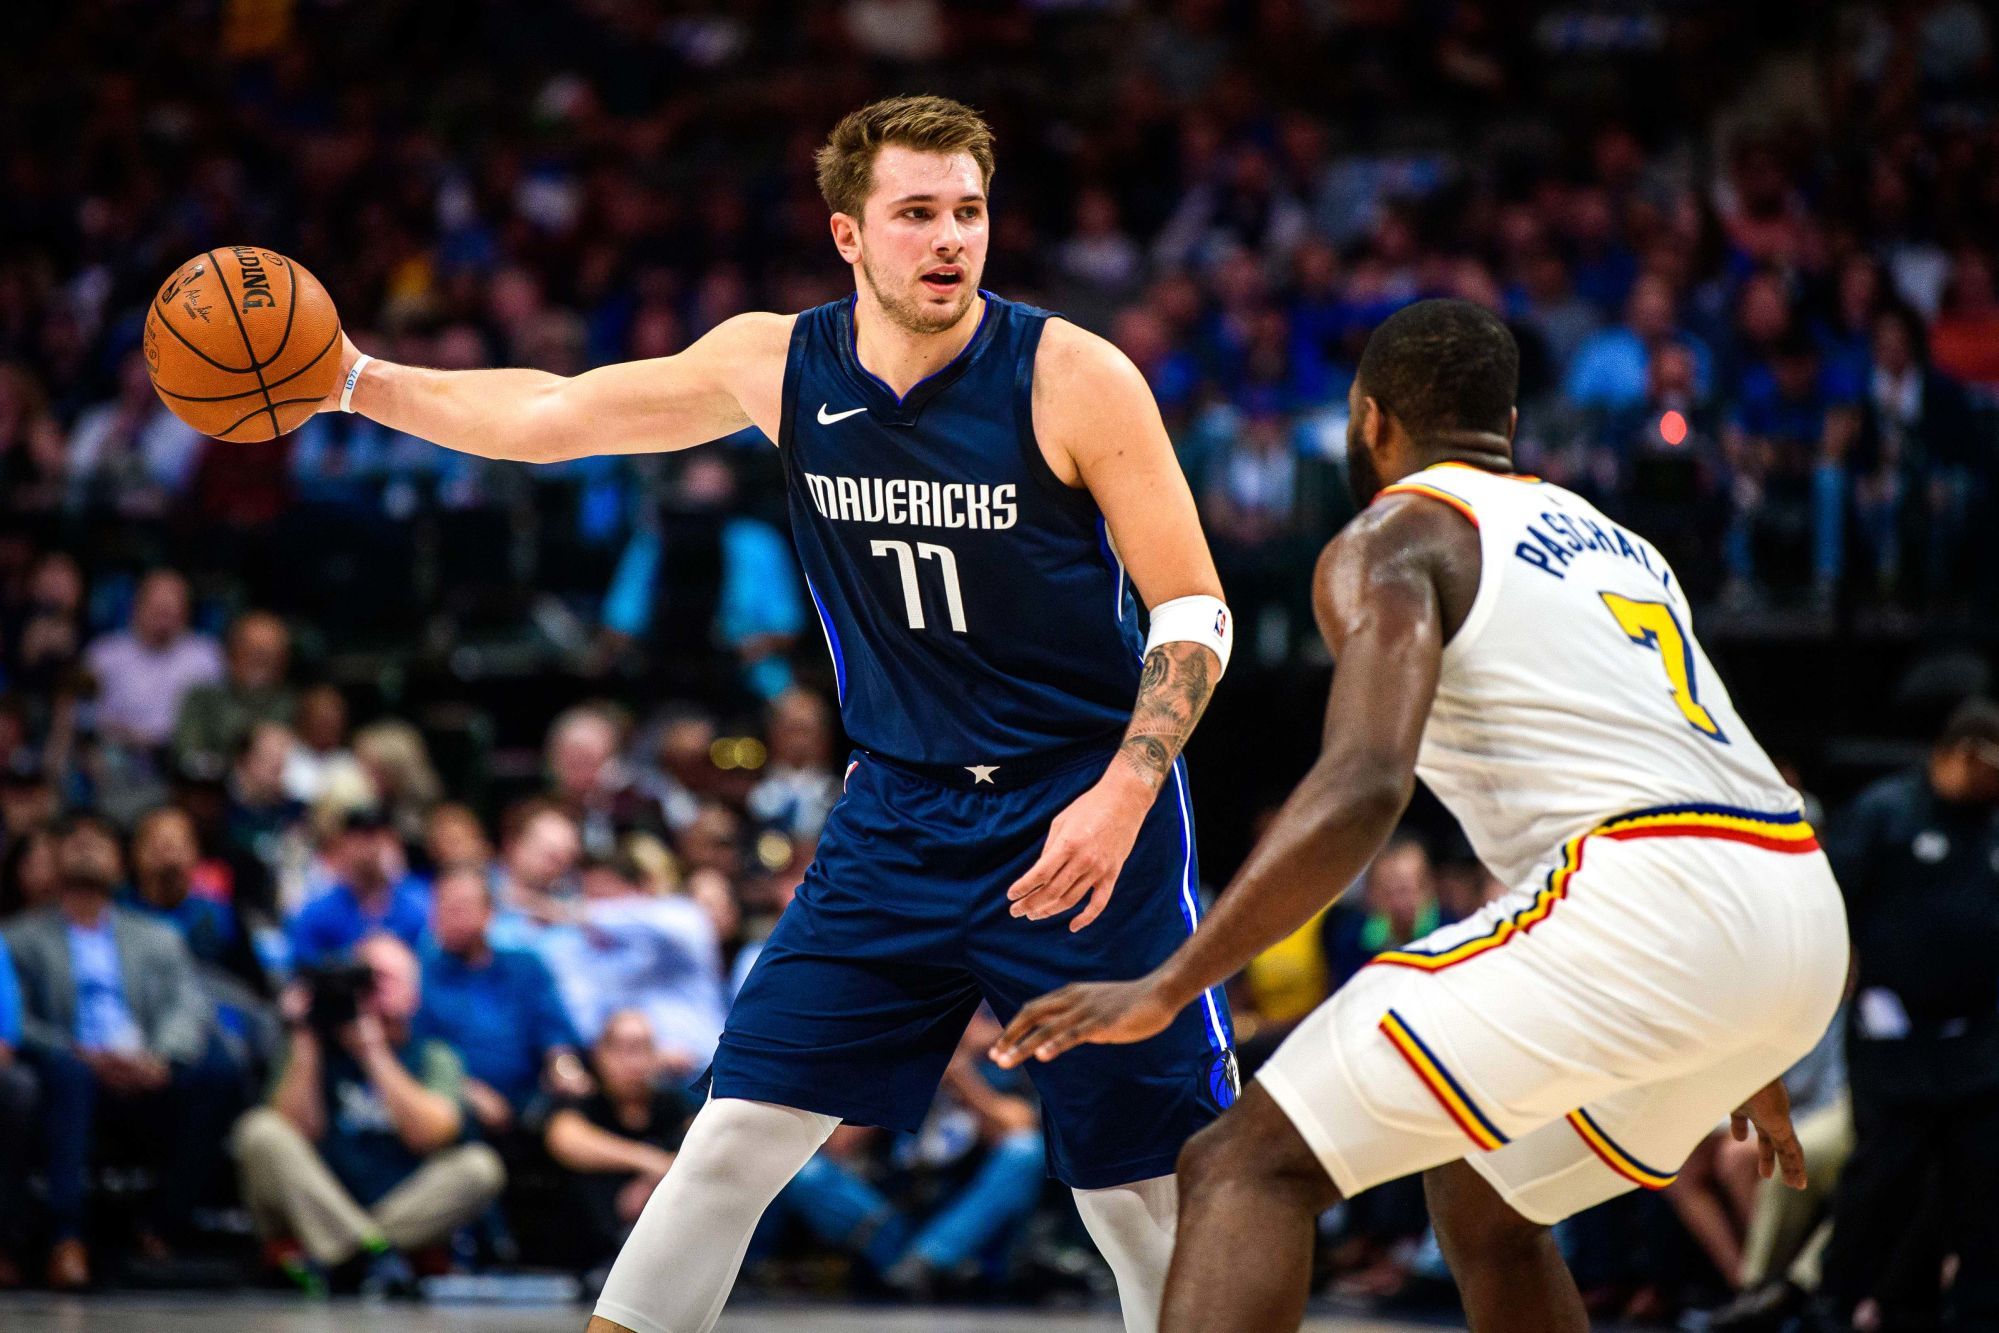 Nov 20, 2019; Dallas, TX, USA; Dallas Mavericks forward Luka Doncic (77) does a no look pass as Golden State Warriors forward Eric Paschall (7) defends during the first quarter at the American Airlines Center. Mandatory Credit: Jerome Miron-USA TODAY Sports/Sipa USA 

Photo by Icon Sport - Luka DONCIC - Eric PASCHALL - American Airlines Center - Dallas (Etats Unis)